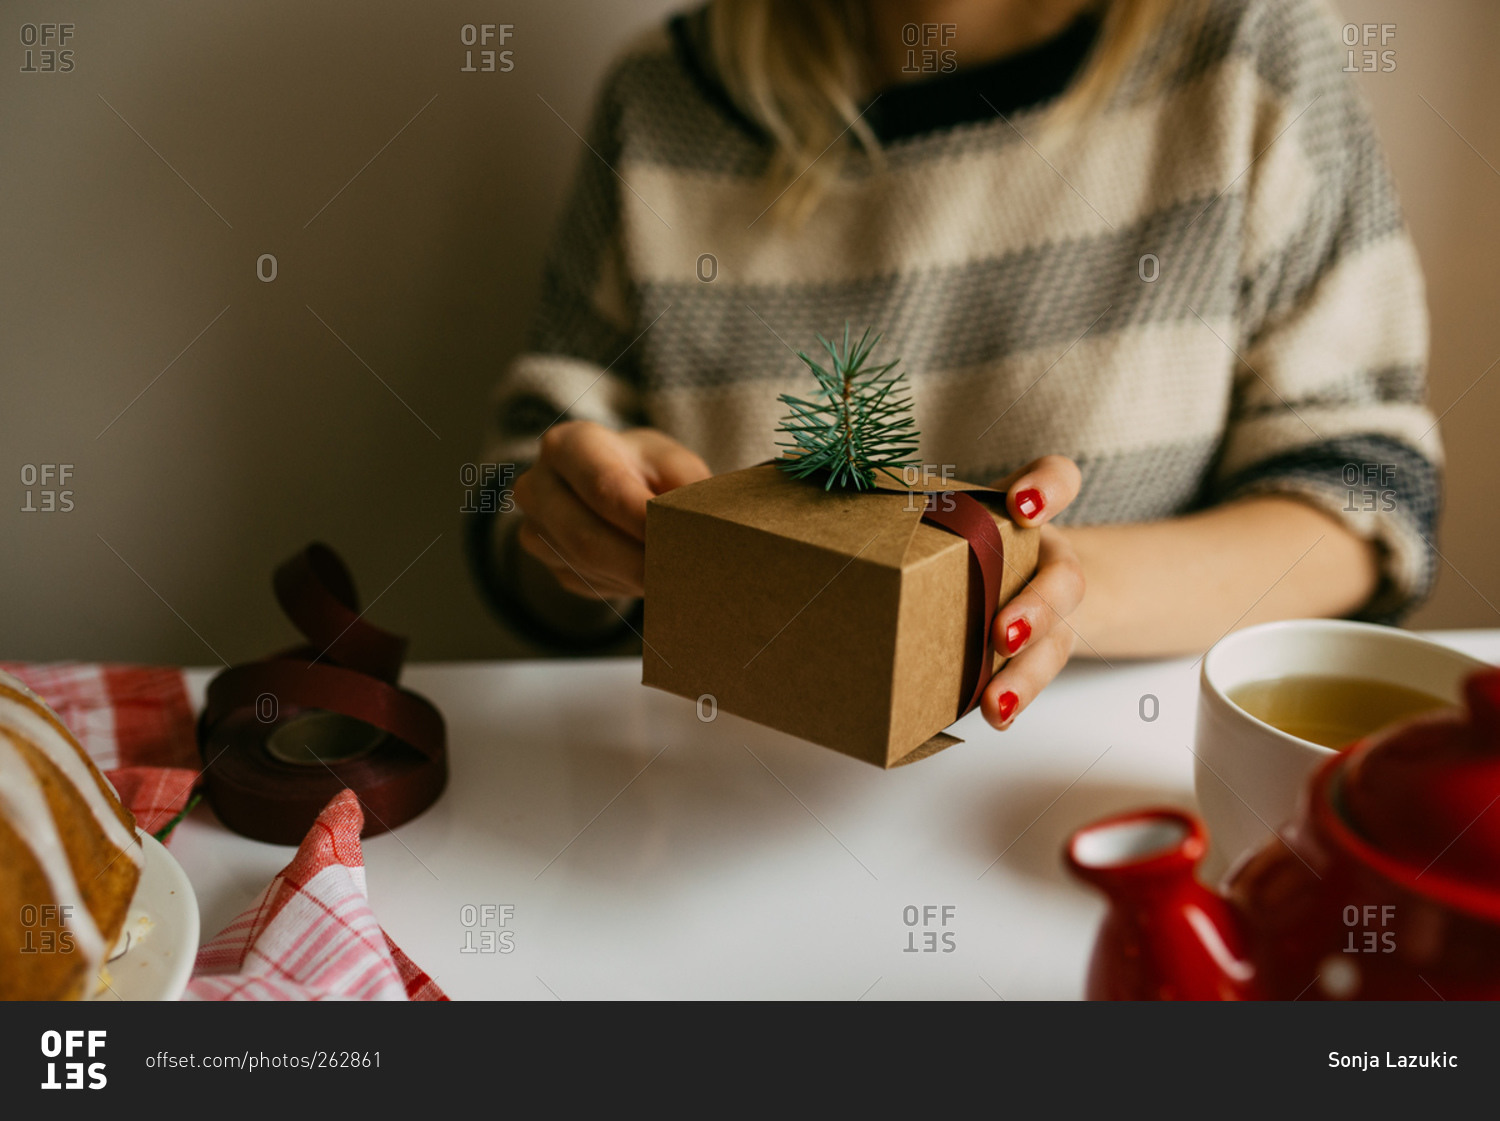 Woman wrapping gift box with pine and ribbon